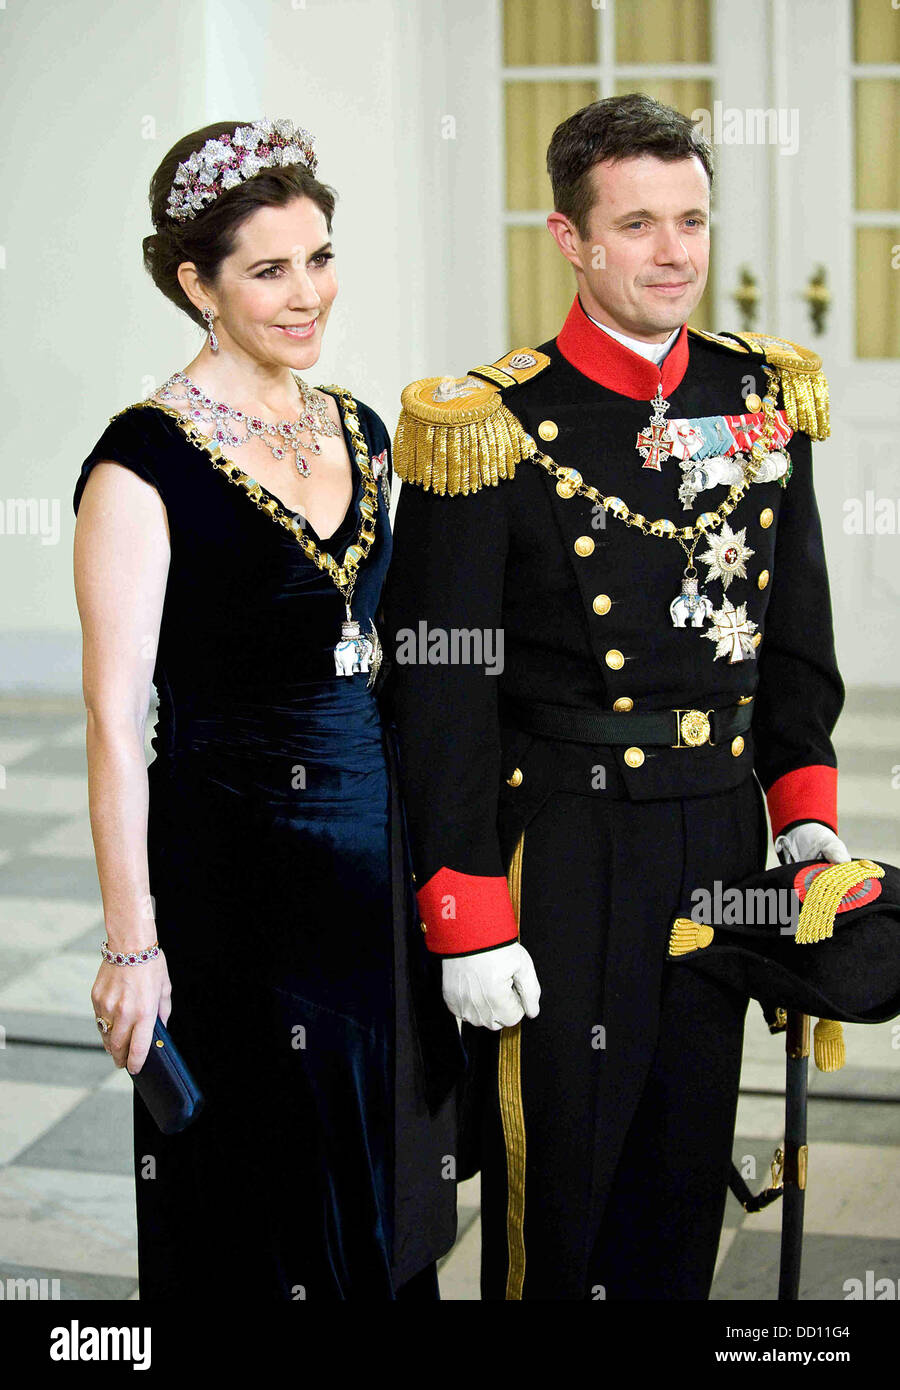 Crown Princess Mary and Crown Prince Frederik of Denmark Queen Margrethe II  of Denmark marks the 40th anniversary of her succession to the country's  throne - Gala Dinner Copenhagen, Denmark - 15.01.12